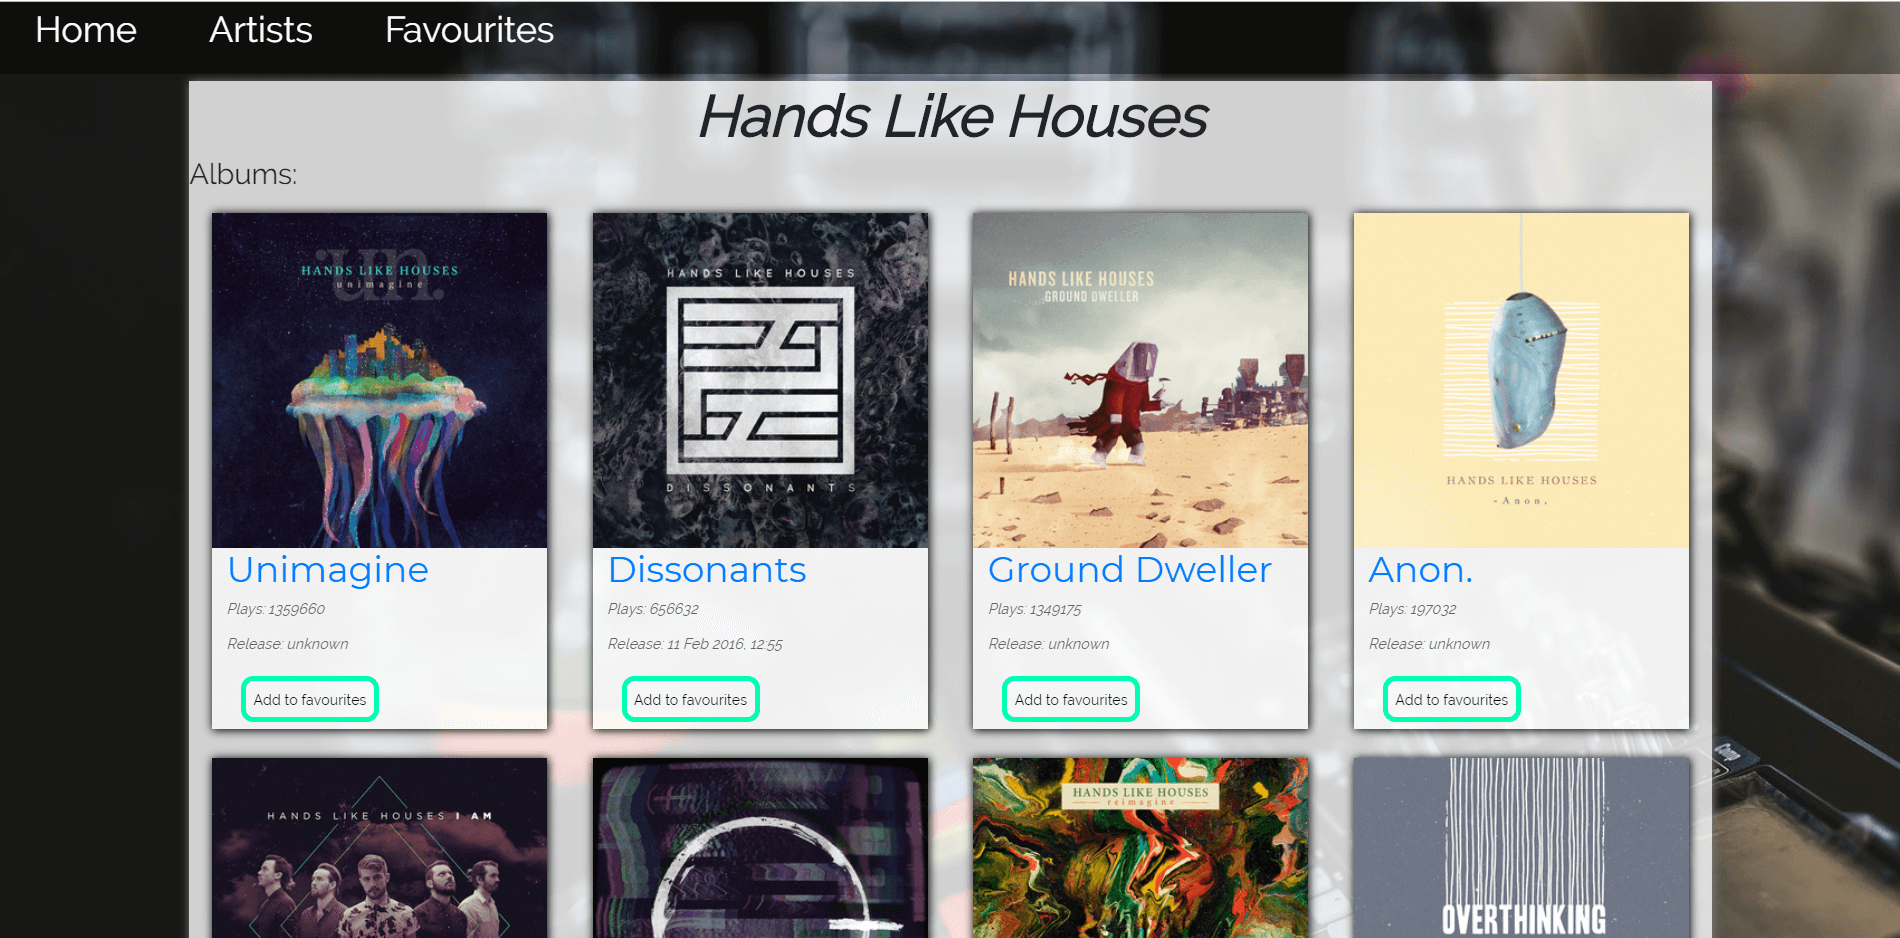 Landing page with different musical albums